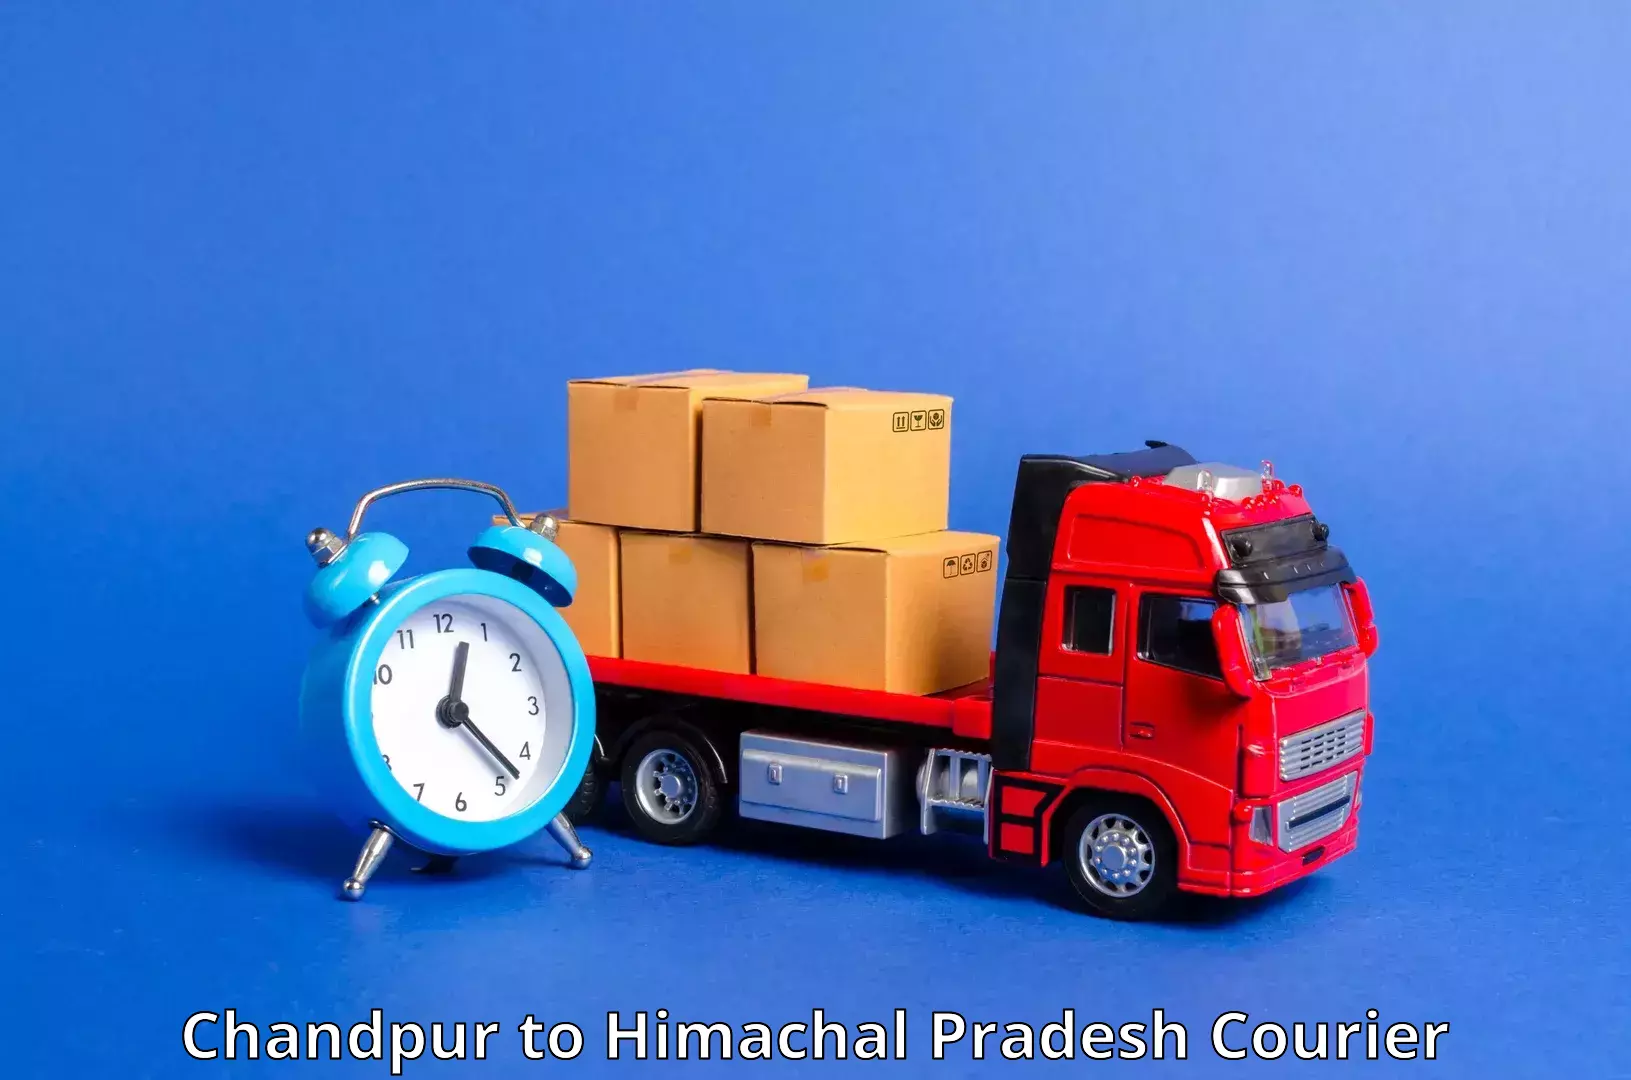 End-to-end delivery Chandpur to Himachal Pradesh